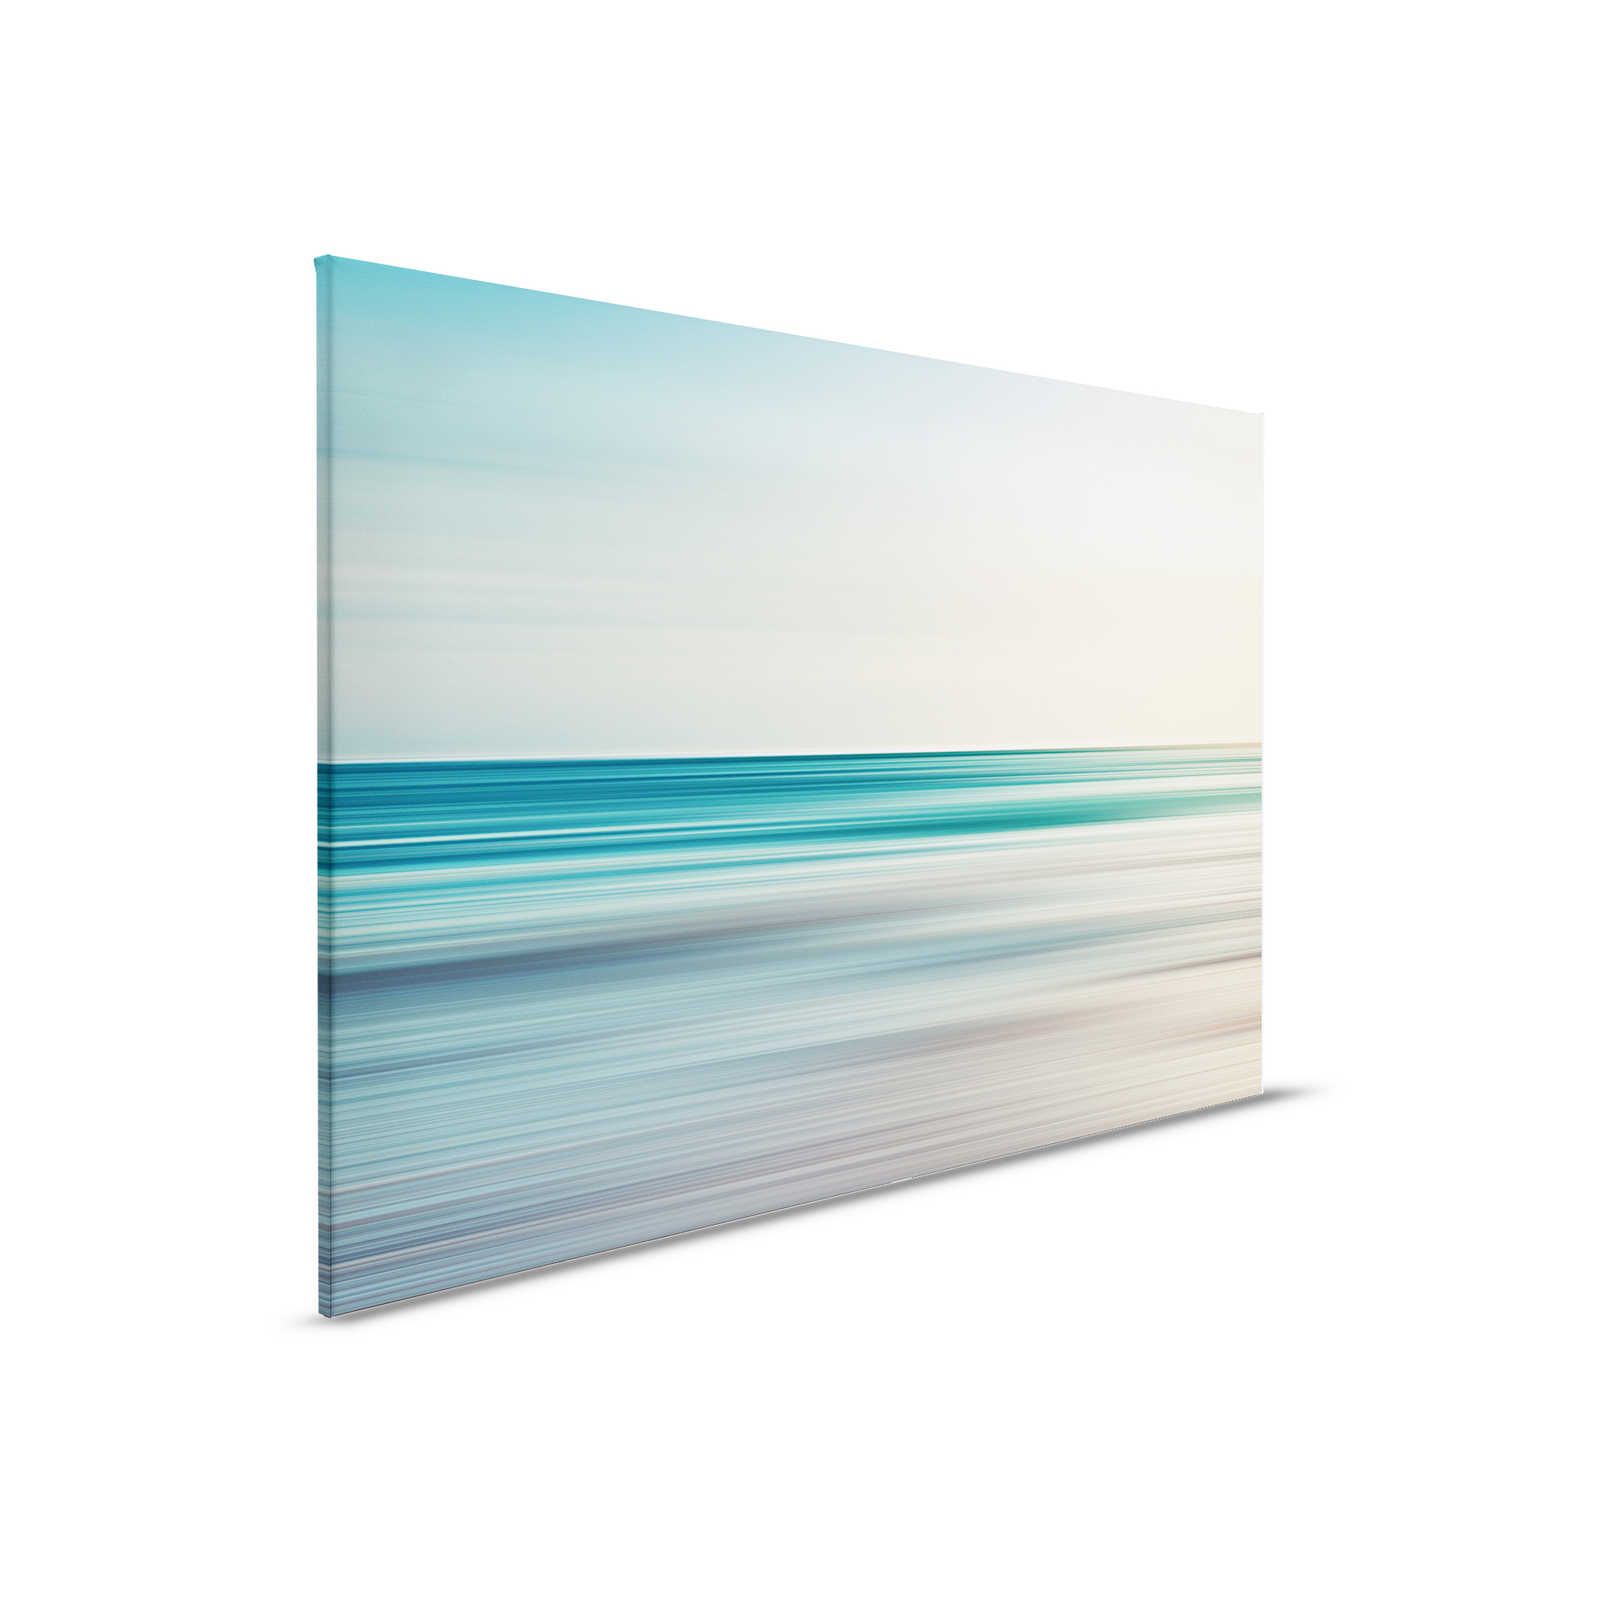         Horizon 1 - Canvas painting abstract landscape in blue - 0,90 m x 0,60 m
    